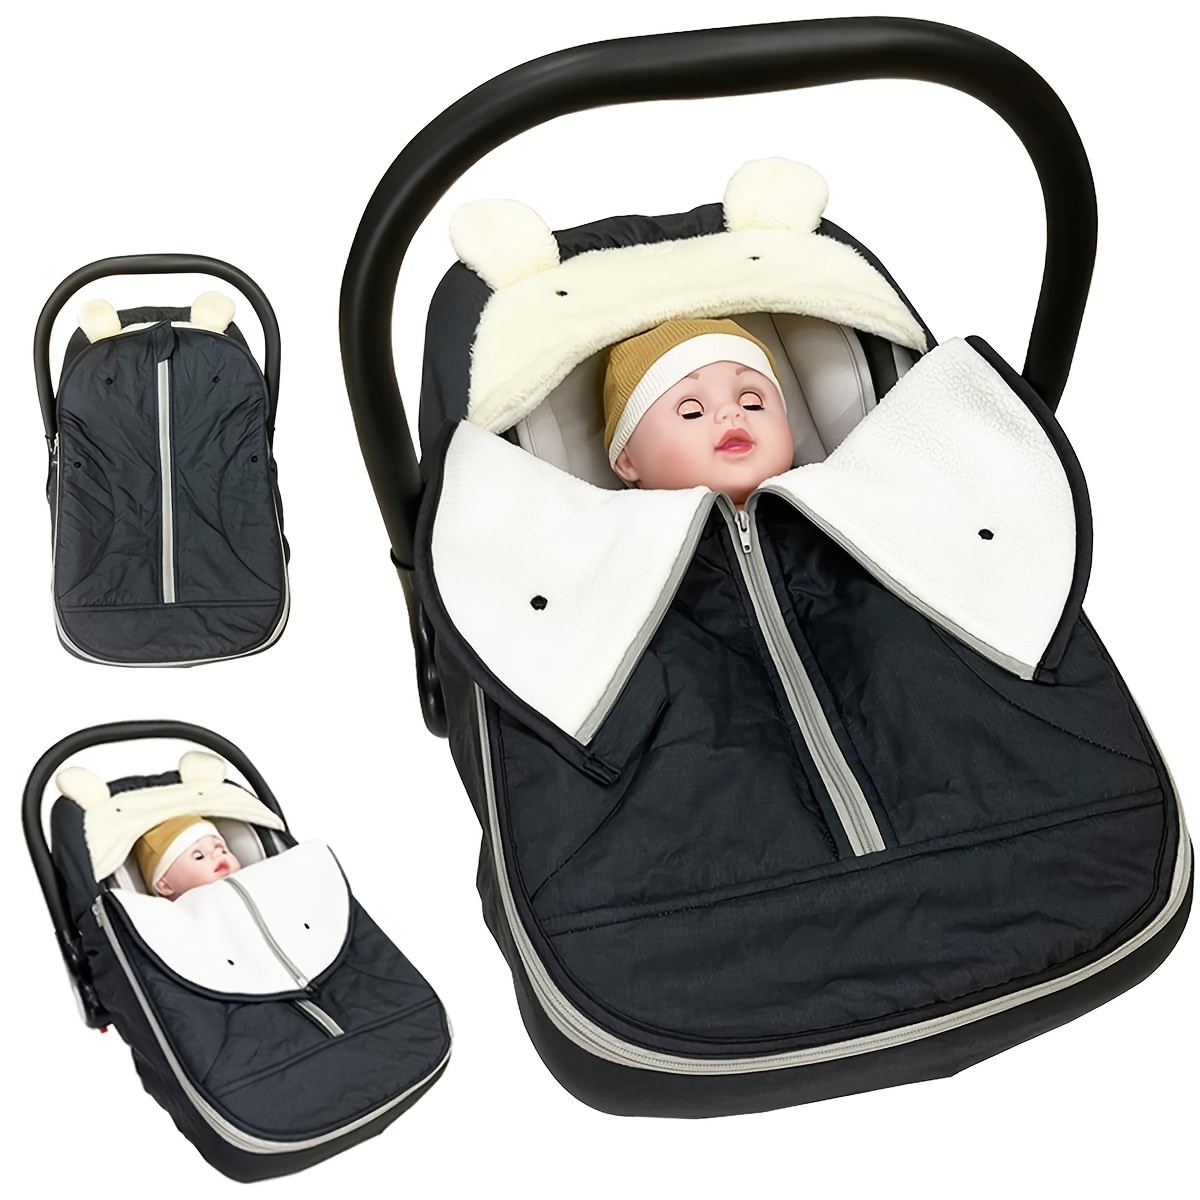 Keep Your Baby Warm And Dry In Winter: The Windproof Infant Car Seat Cover,  Christmas Halloween Thanksgiving Gift